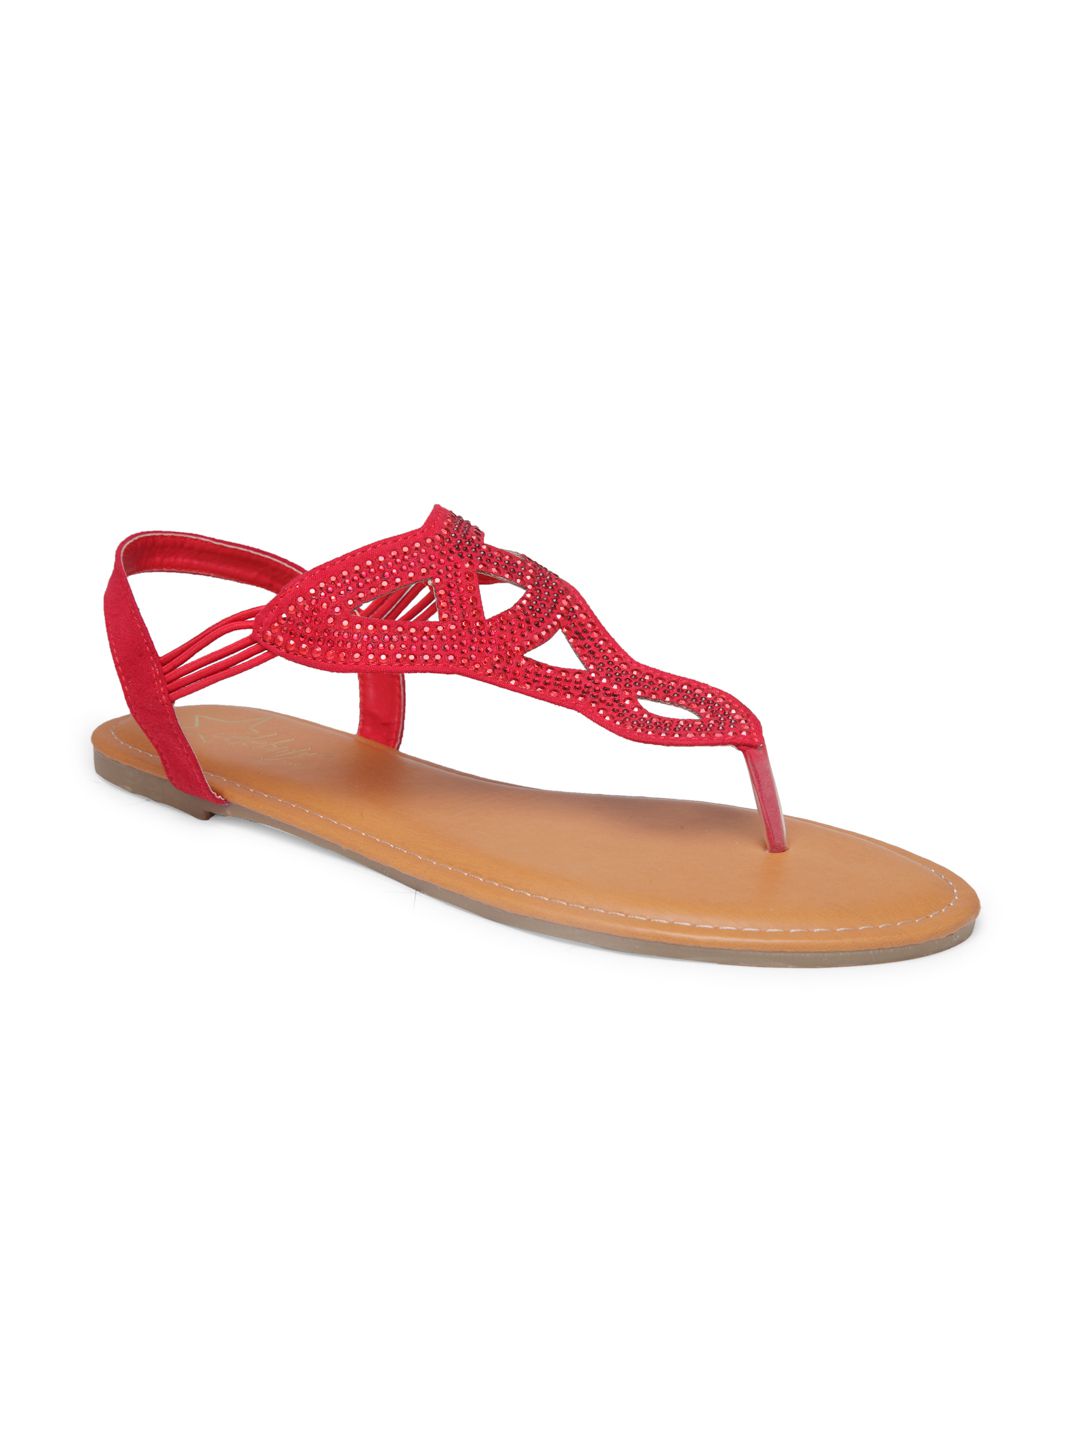 London Rag Red Floater Sandals Price in India- Buy London Rag Red ...